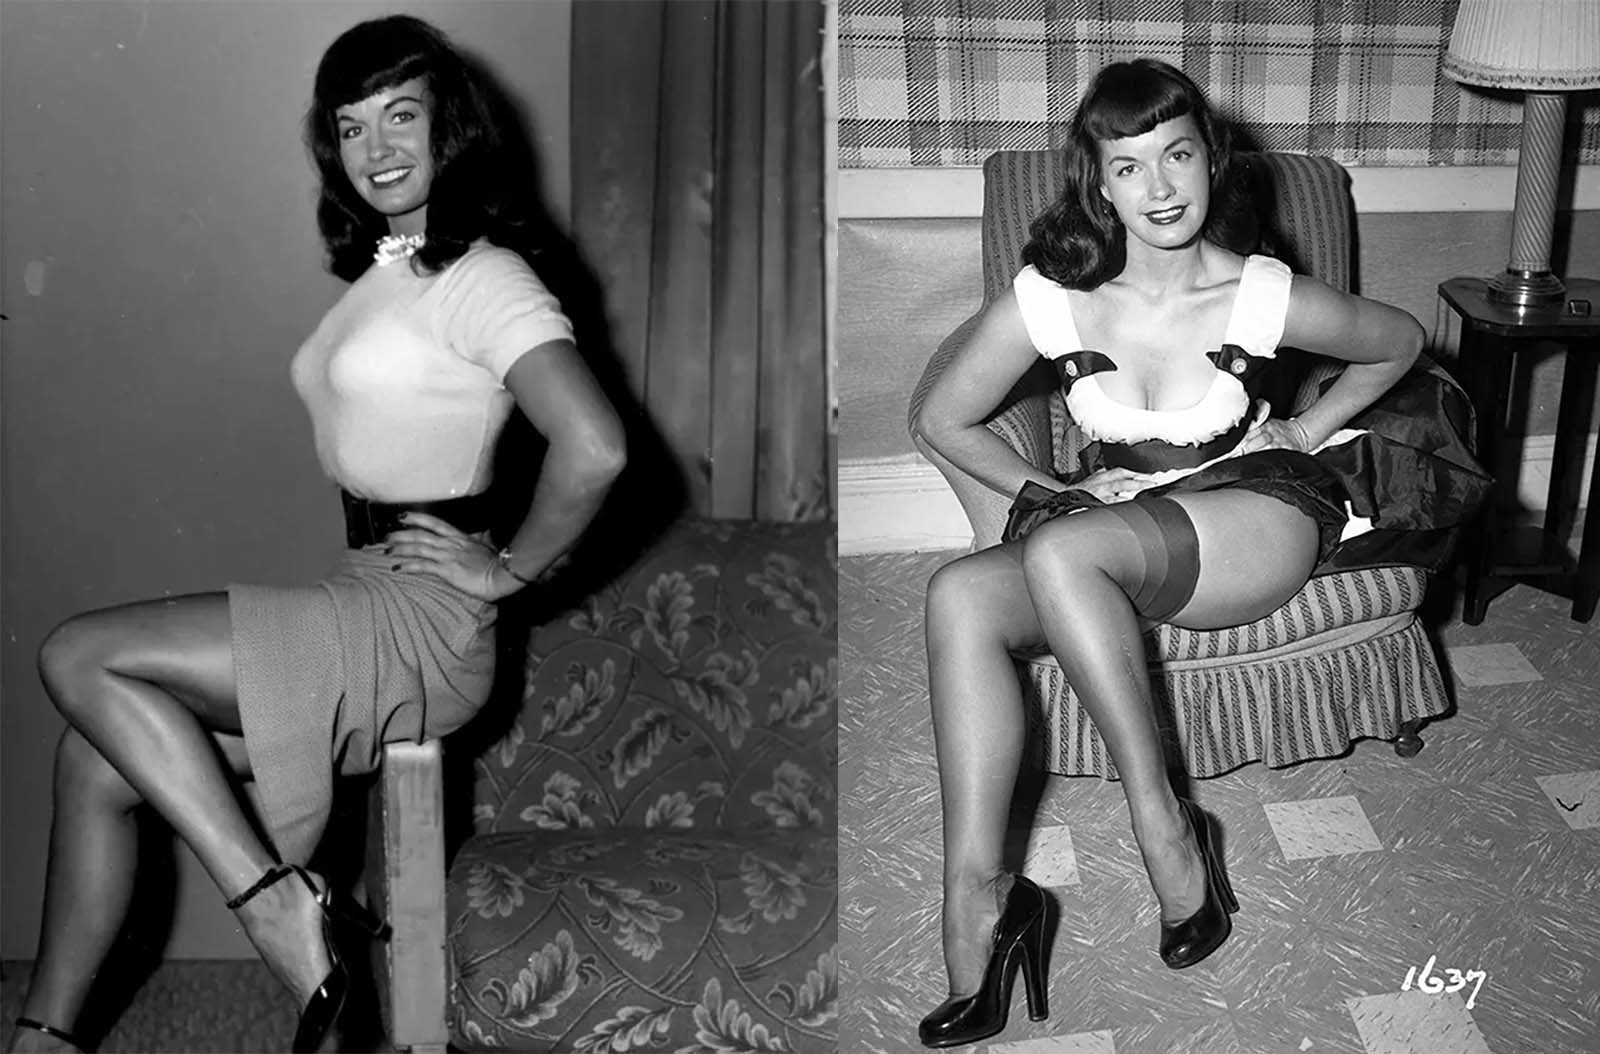 Bettie Page: Vintage photo of the 